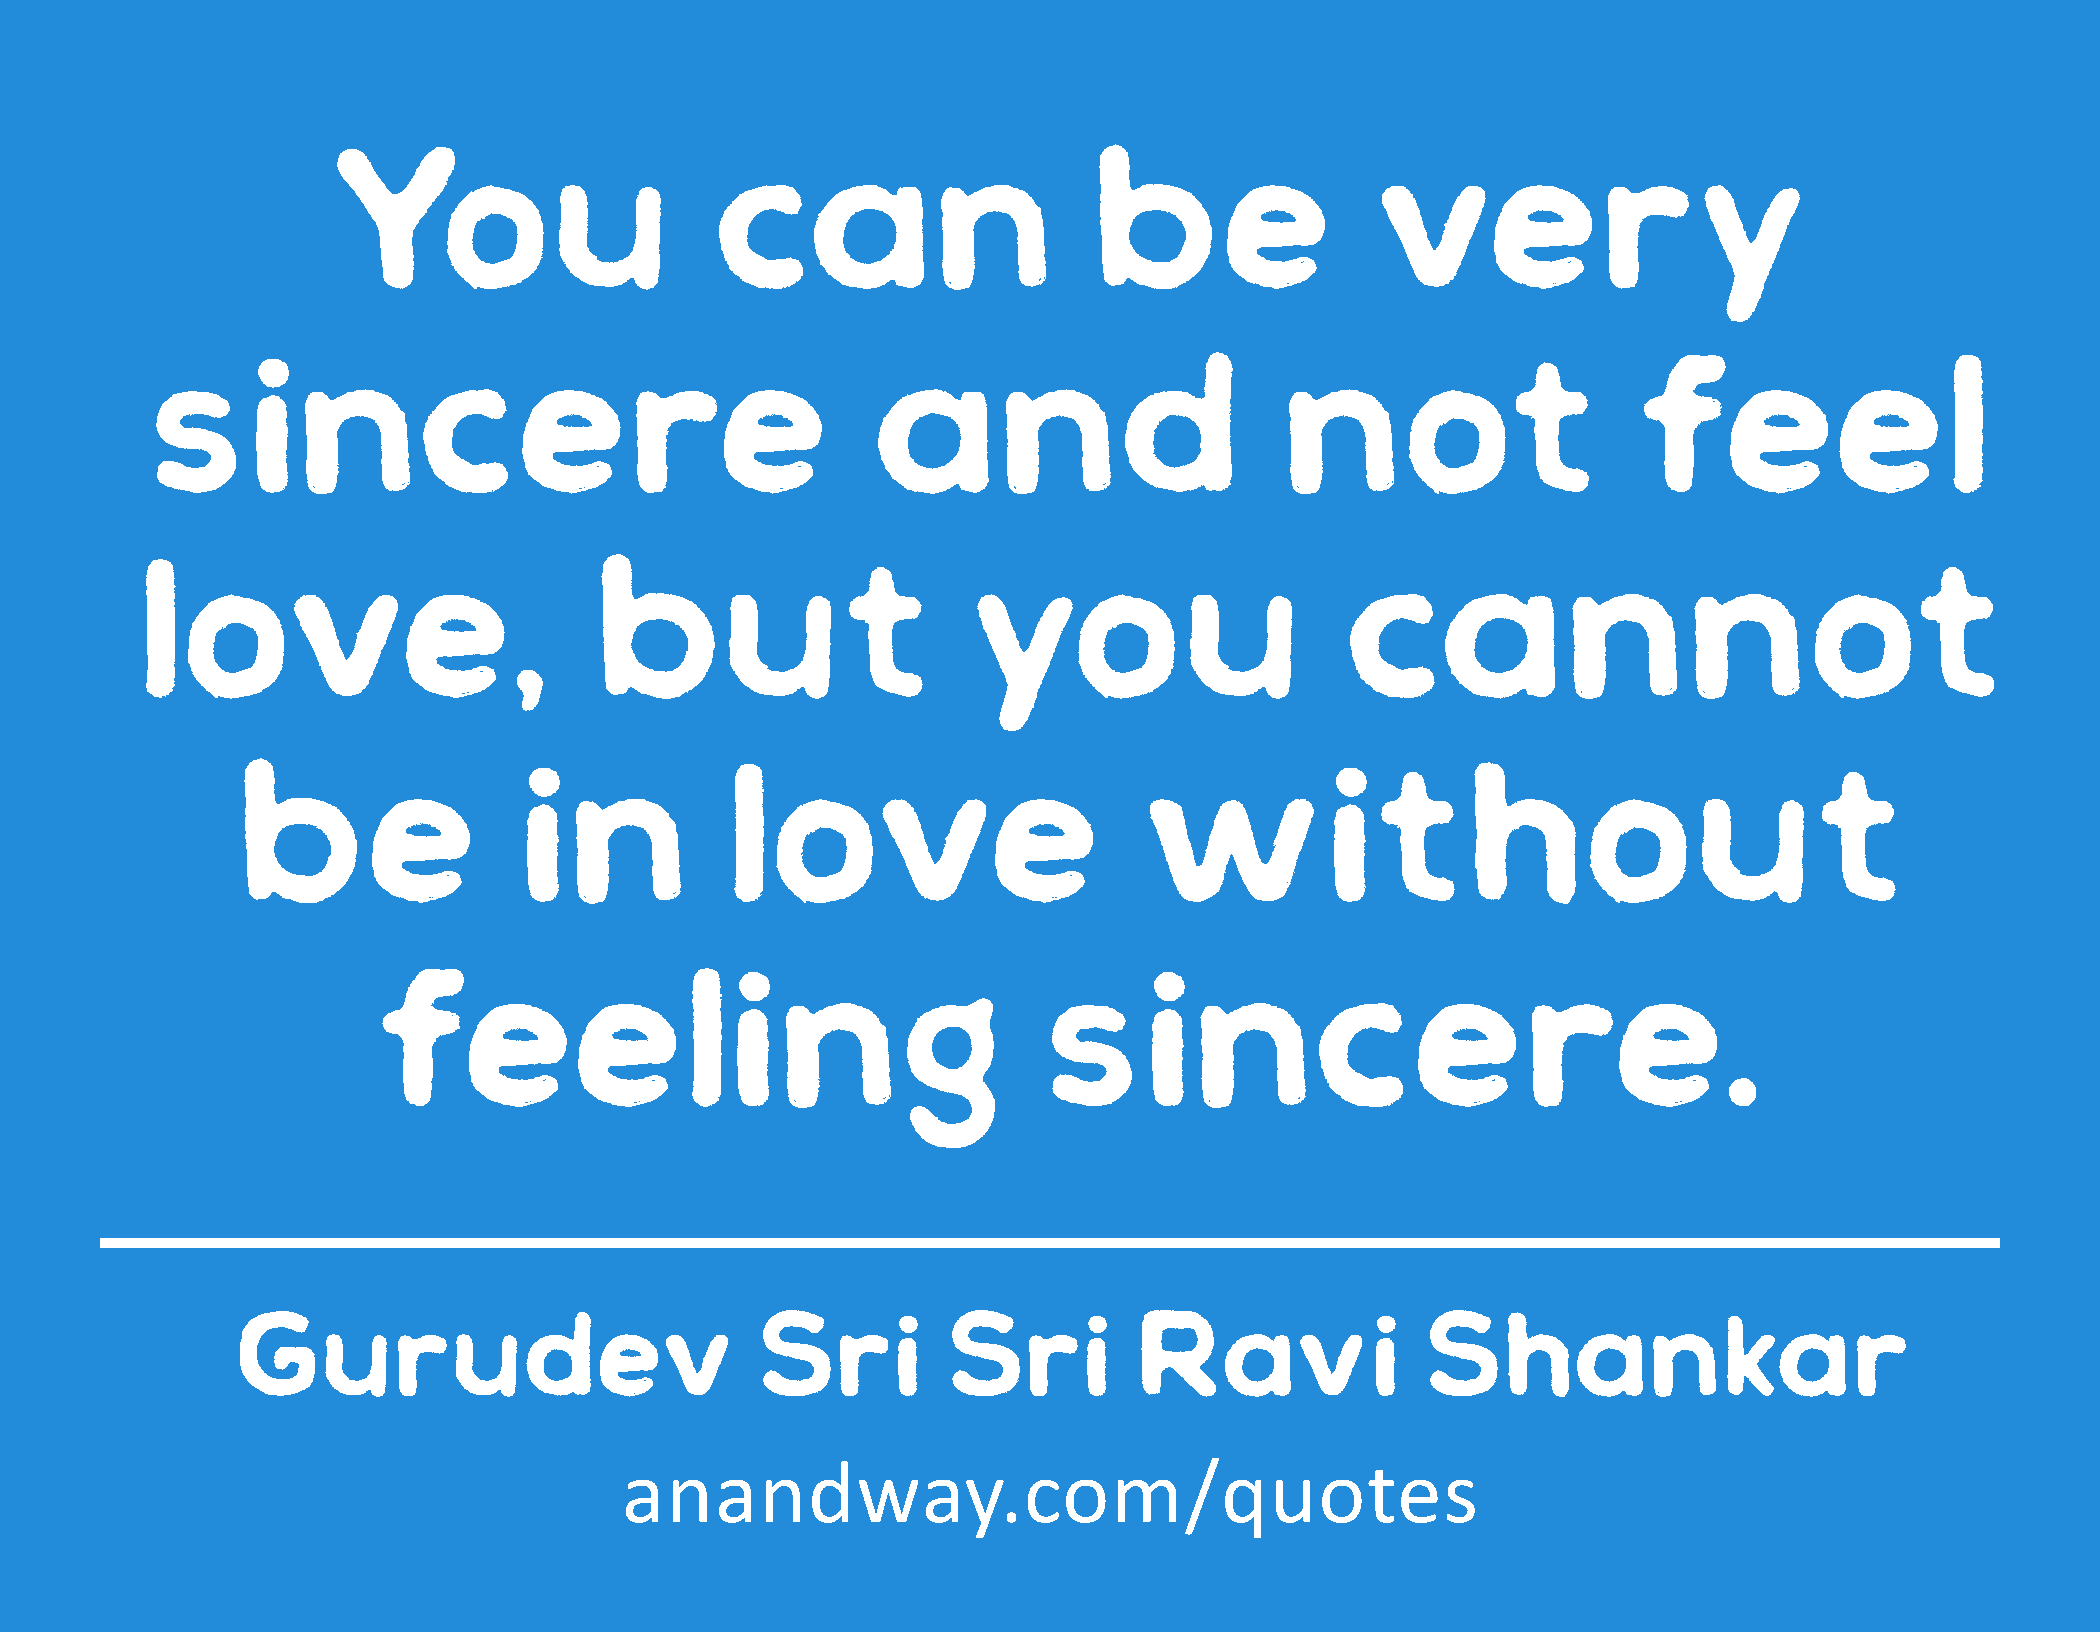 You can be very sincere and not feel love, but you cannot be in love without feeling sincere. 
 -Gurudev Sri Sri Ravi Shankar